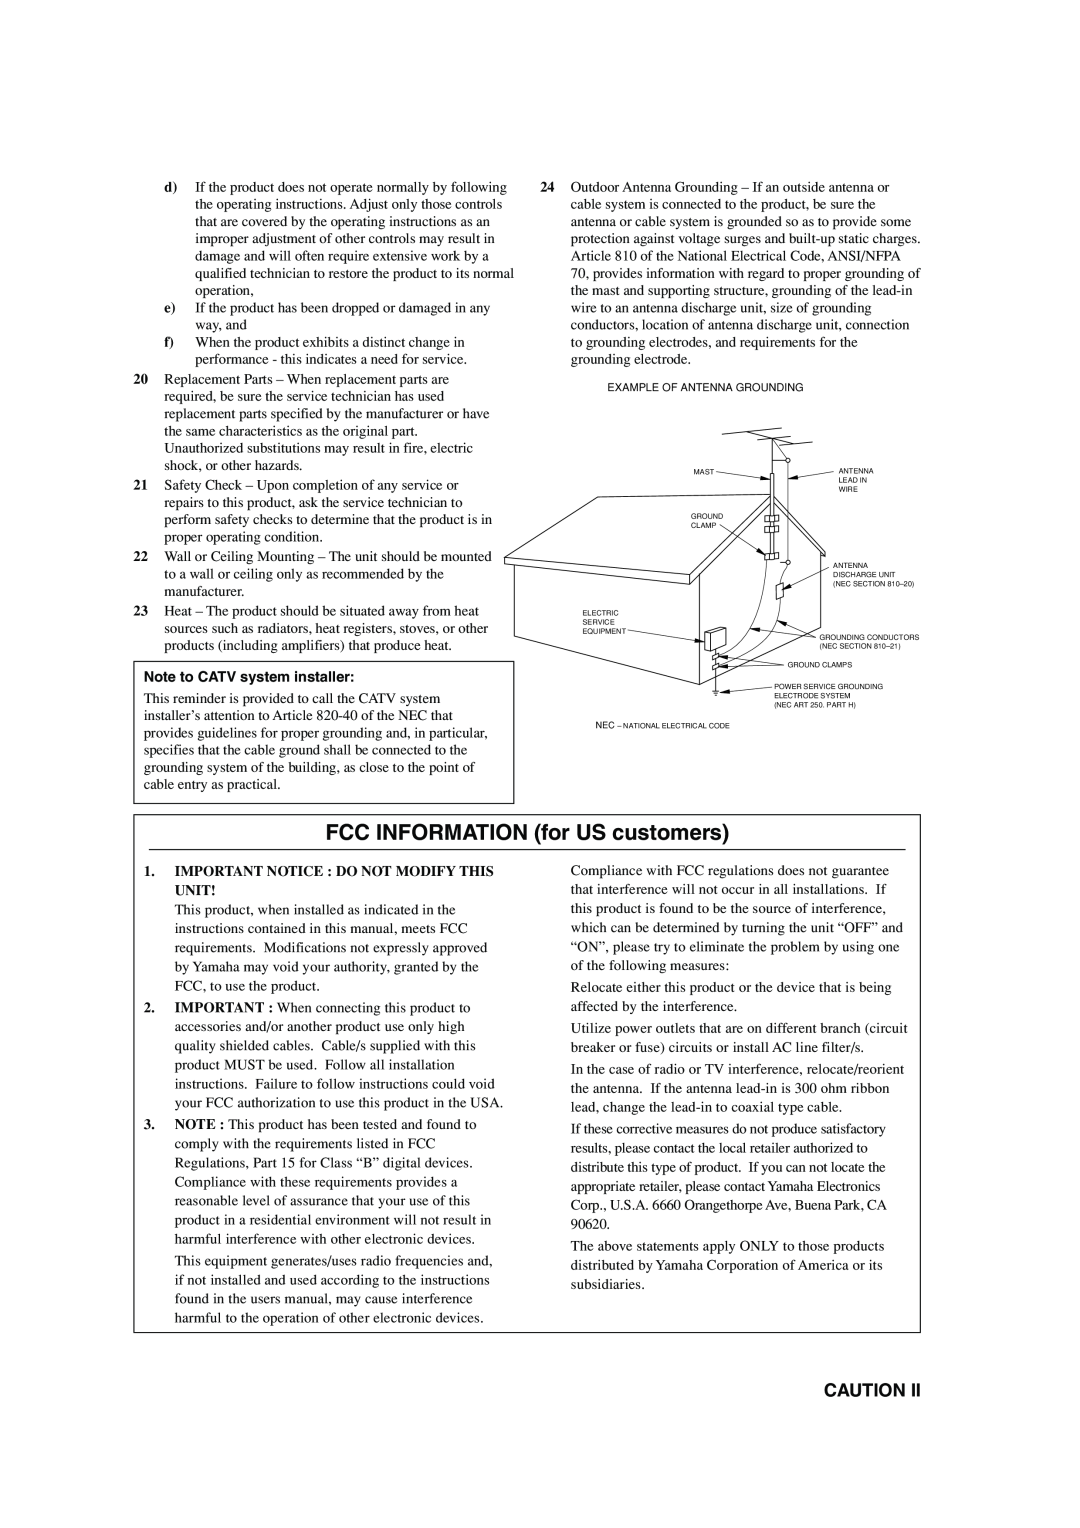 Yamaha HTR-5640 owner manual FCC INFORMATION for US customers, Note to CATV system installer 